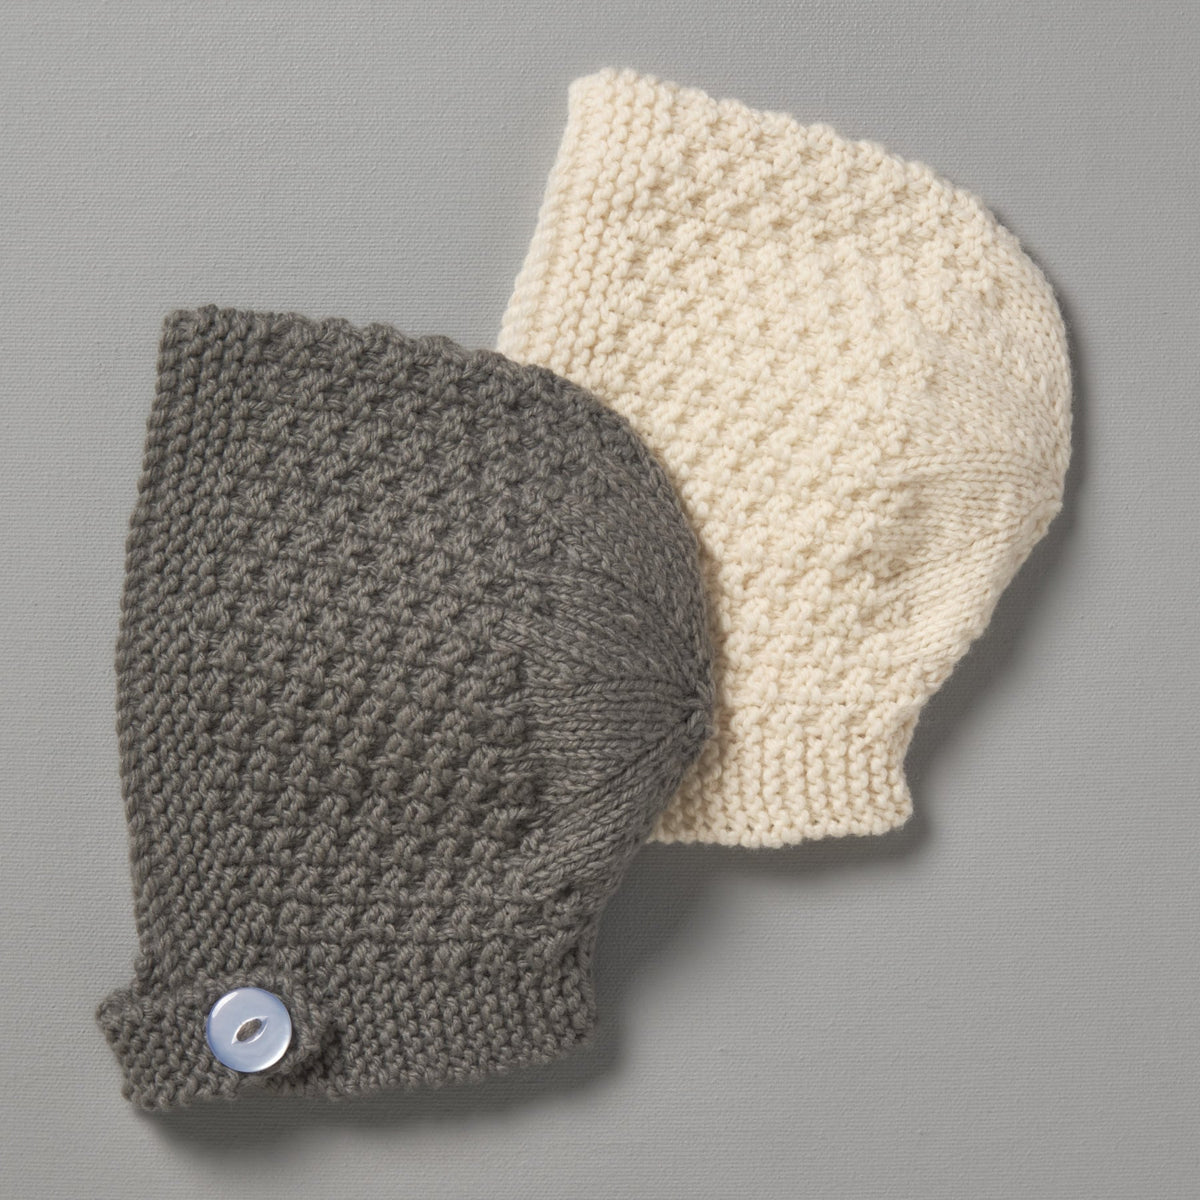 Two Hand Knitted Baby Bonnets - Mushroom by Weebits on a gray surface.